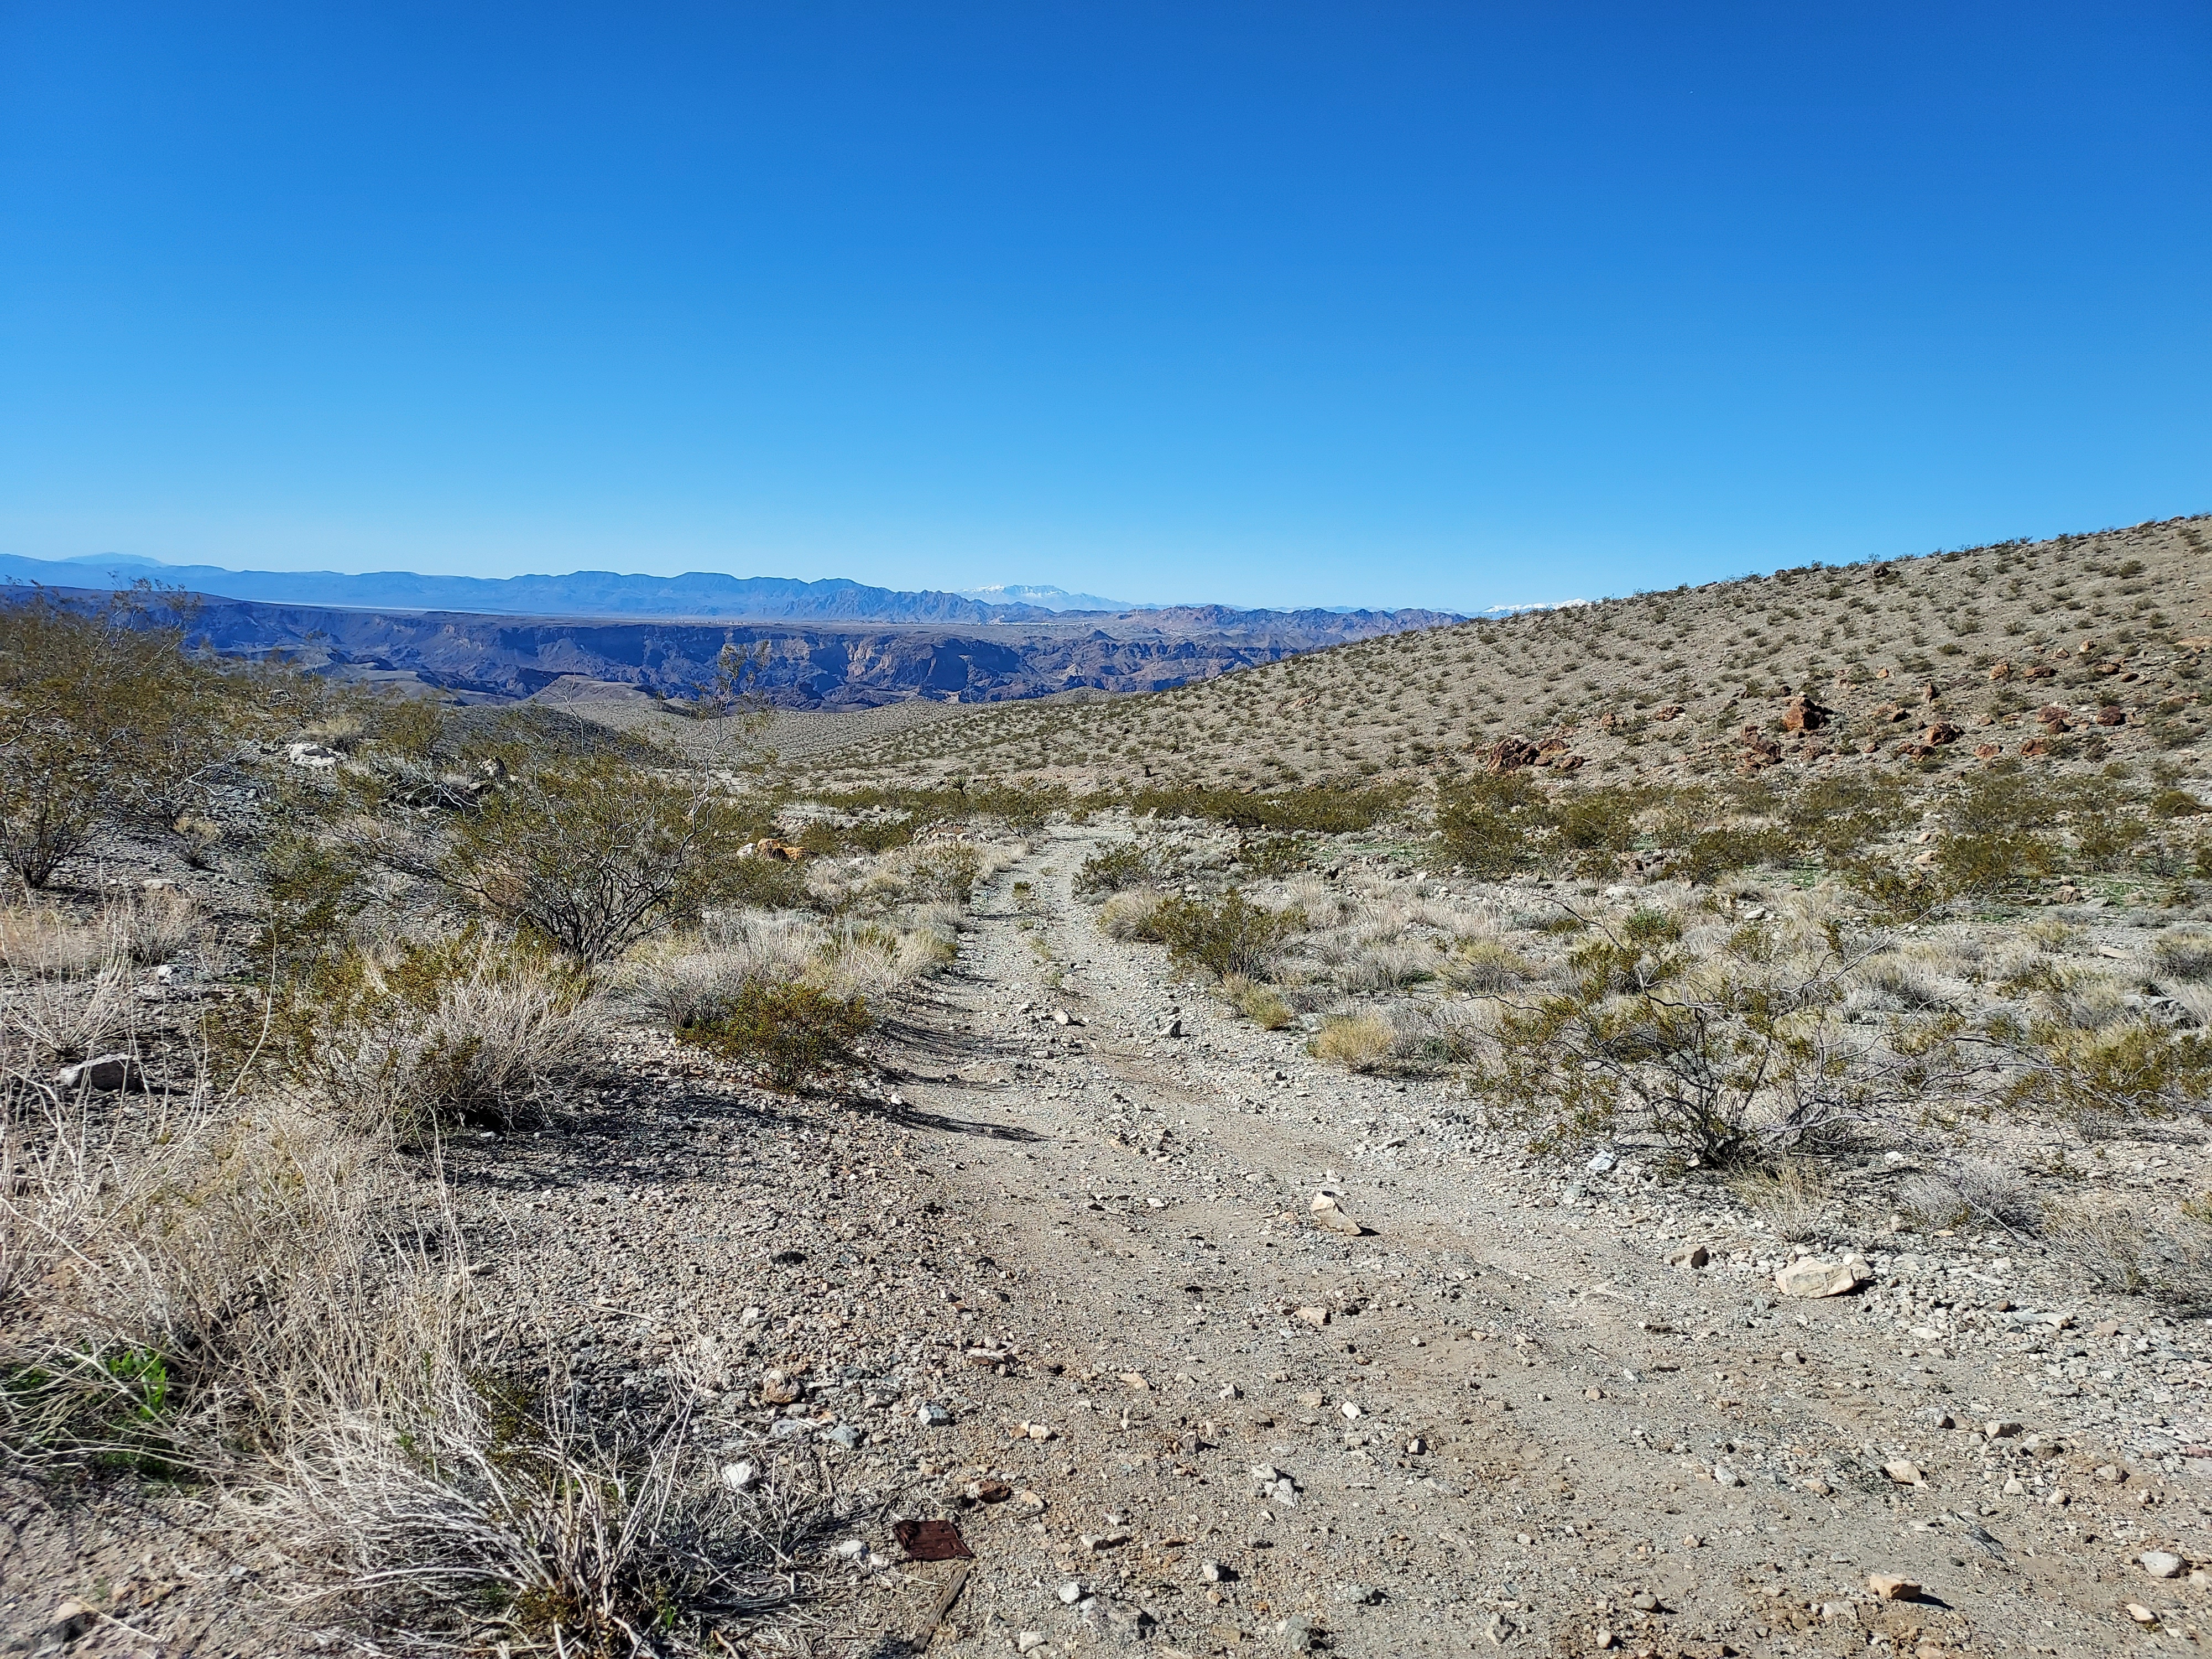 4x4 road Lake Mead National Recreation Area